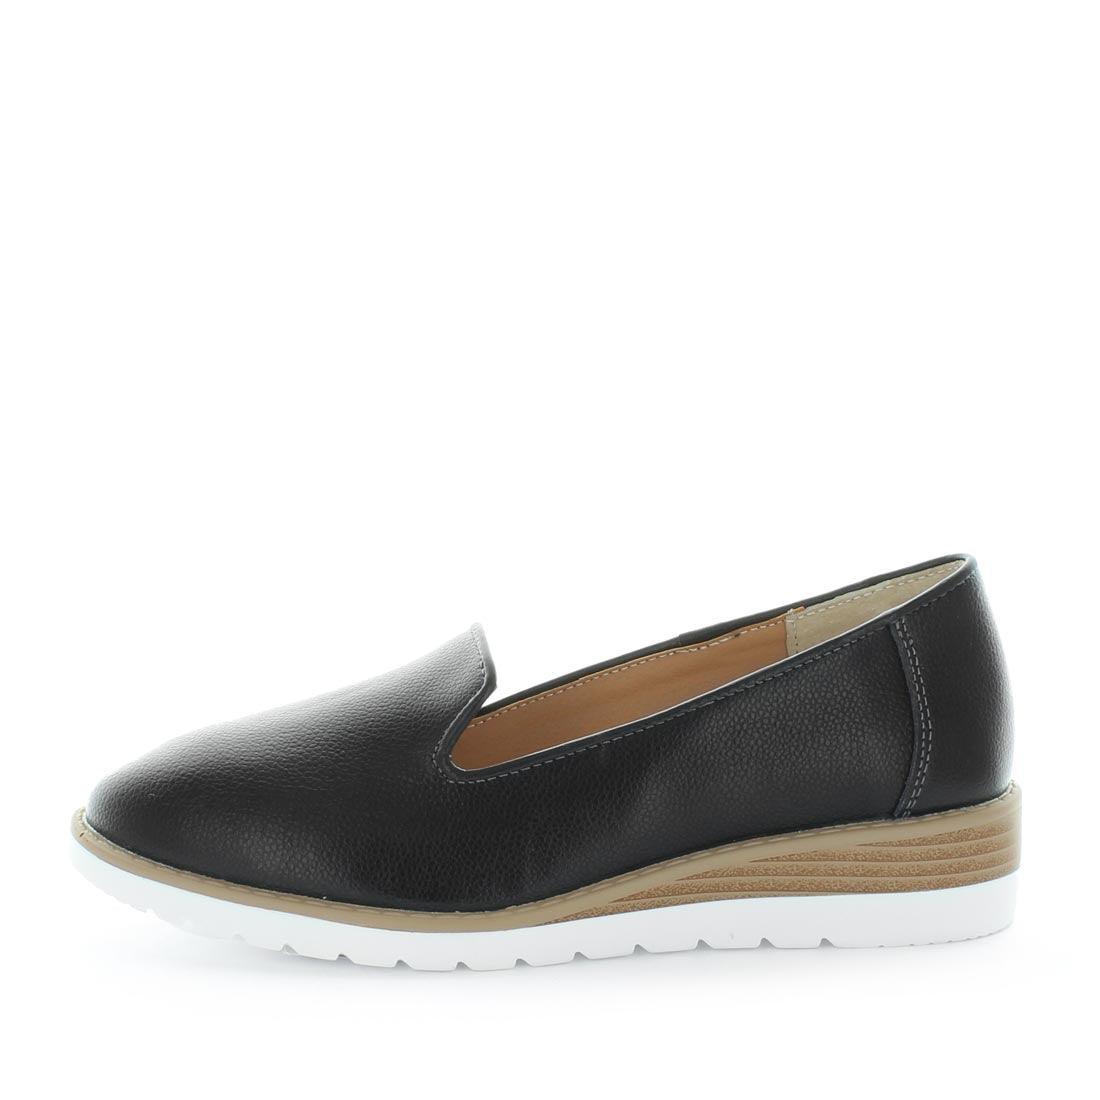 Claudia by just bee, just bee comfort, leather upper, classic wedge style albert shaped women's flat, women's flat, women's leather flats, leather women's comfort wedge style flats, ladies flat, ladies comfort flat  (7552426967273)